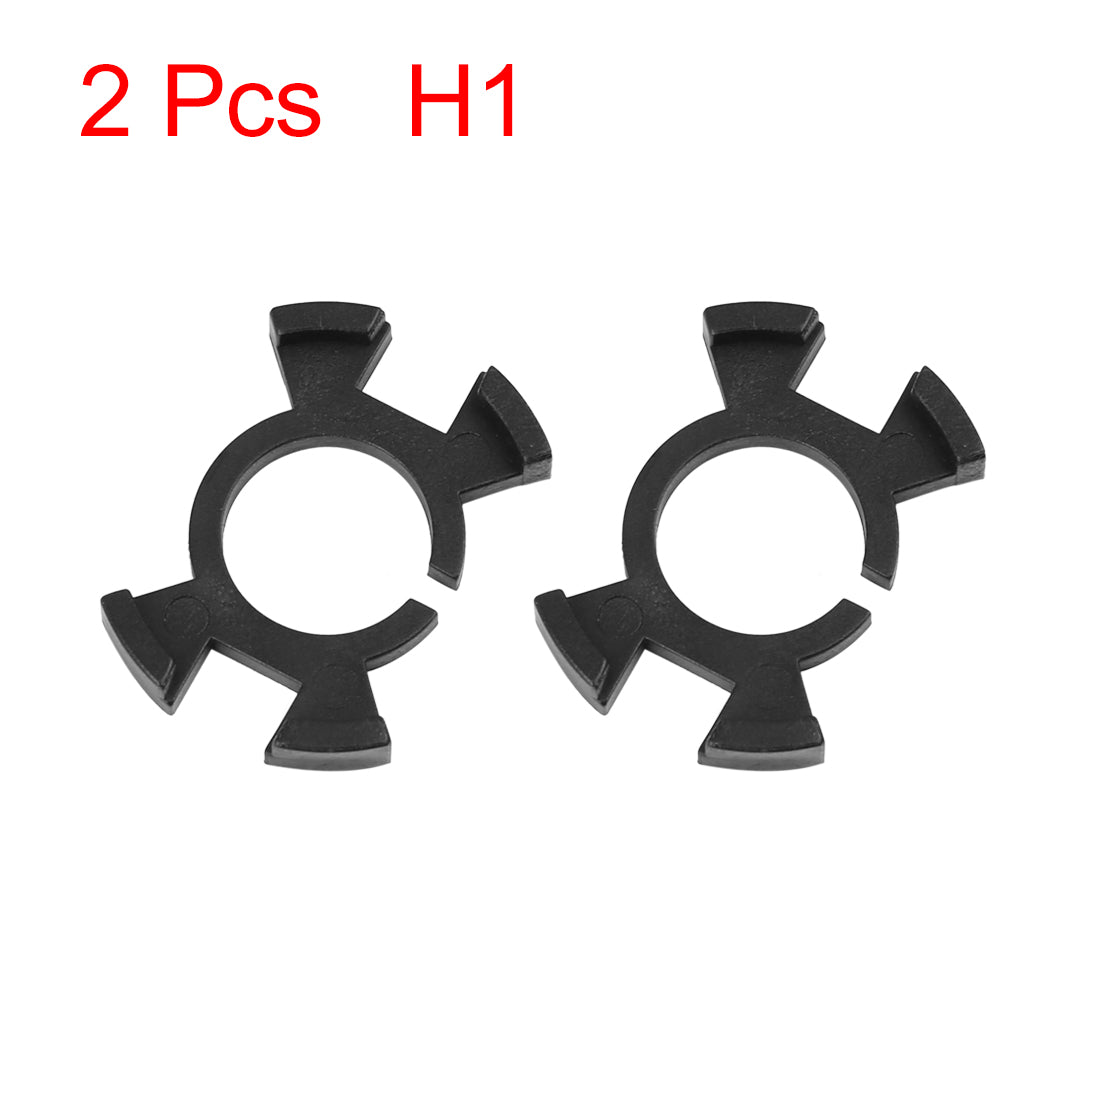 uxcell Uxcell 2 Pcs Black Plastic H1 LED Headlight Lamp Bulb Holder Adapter for Car Vehicle